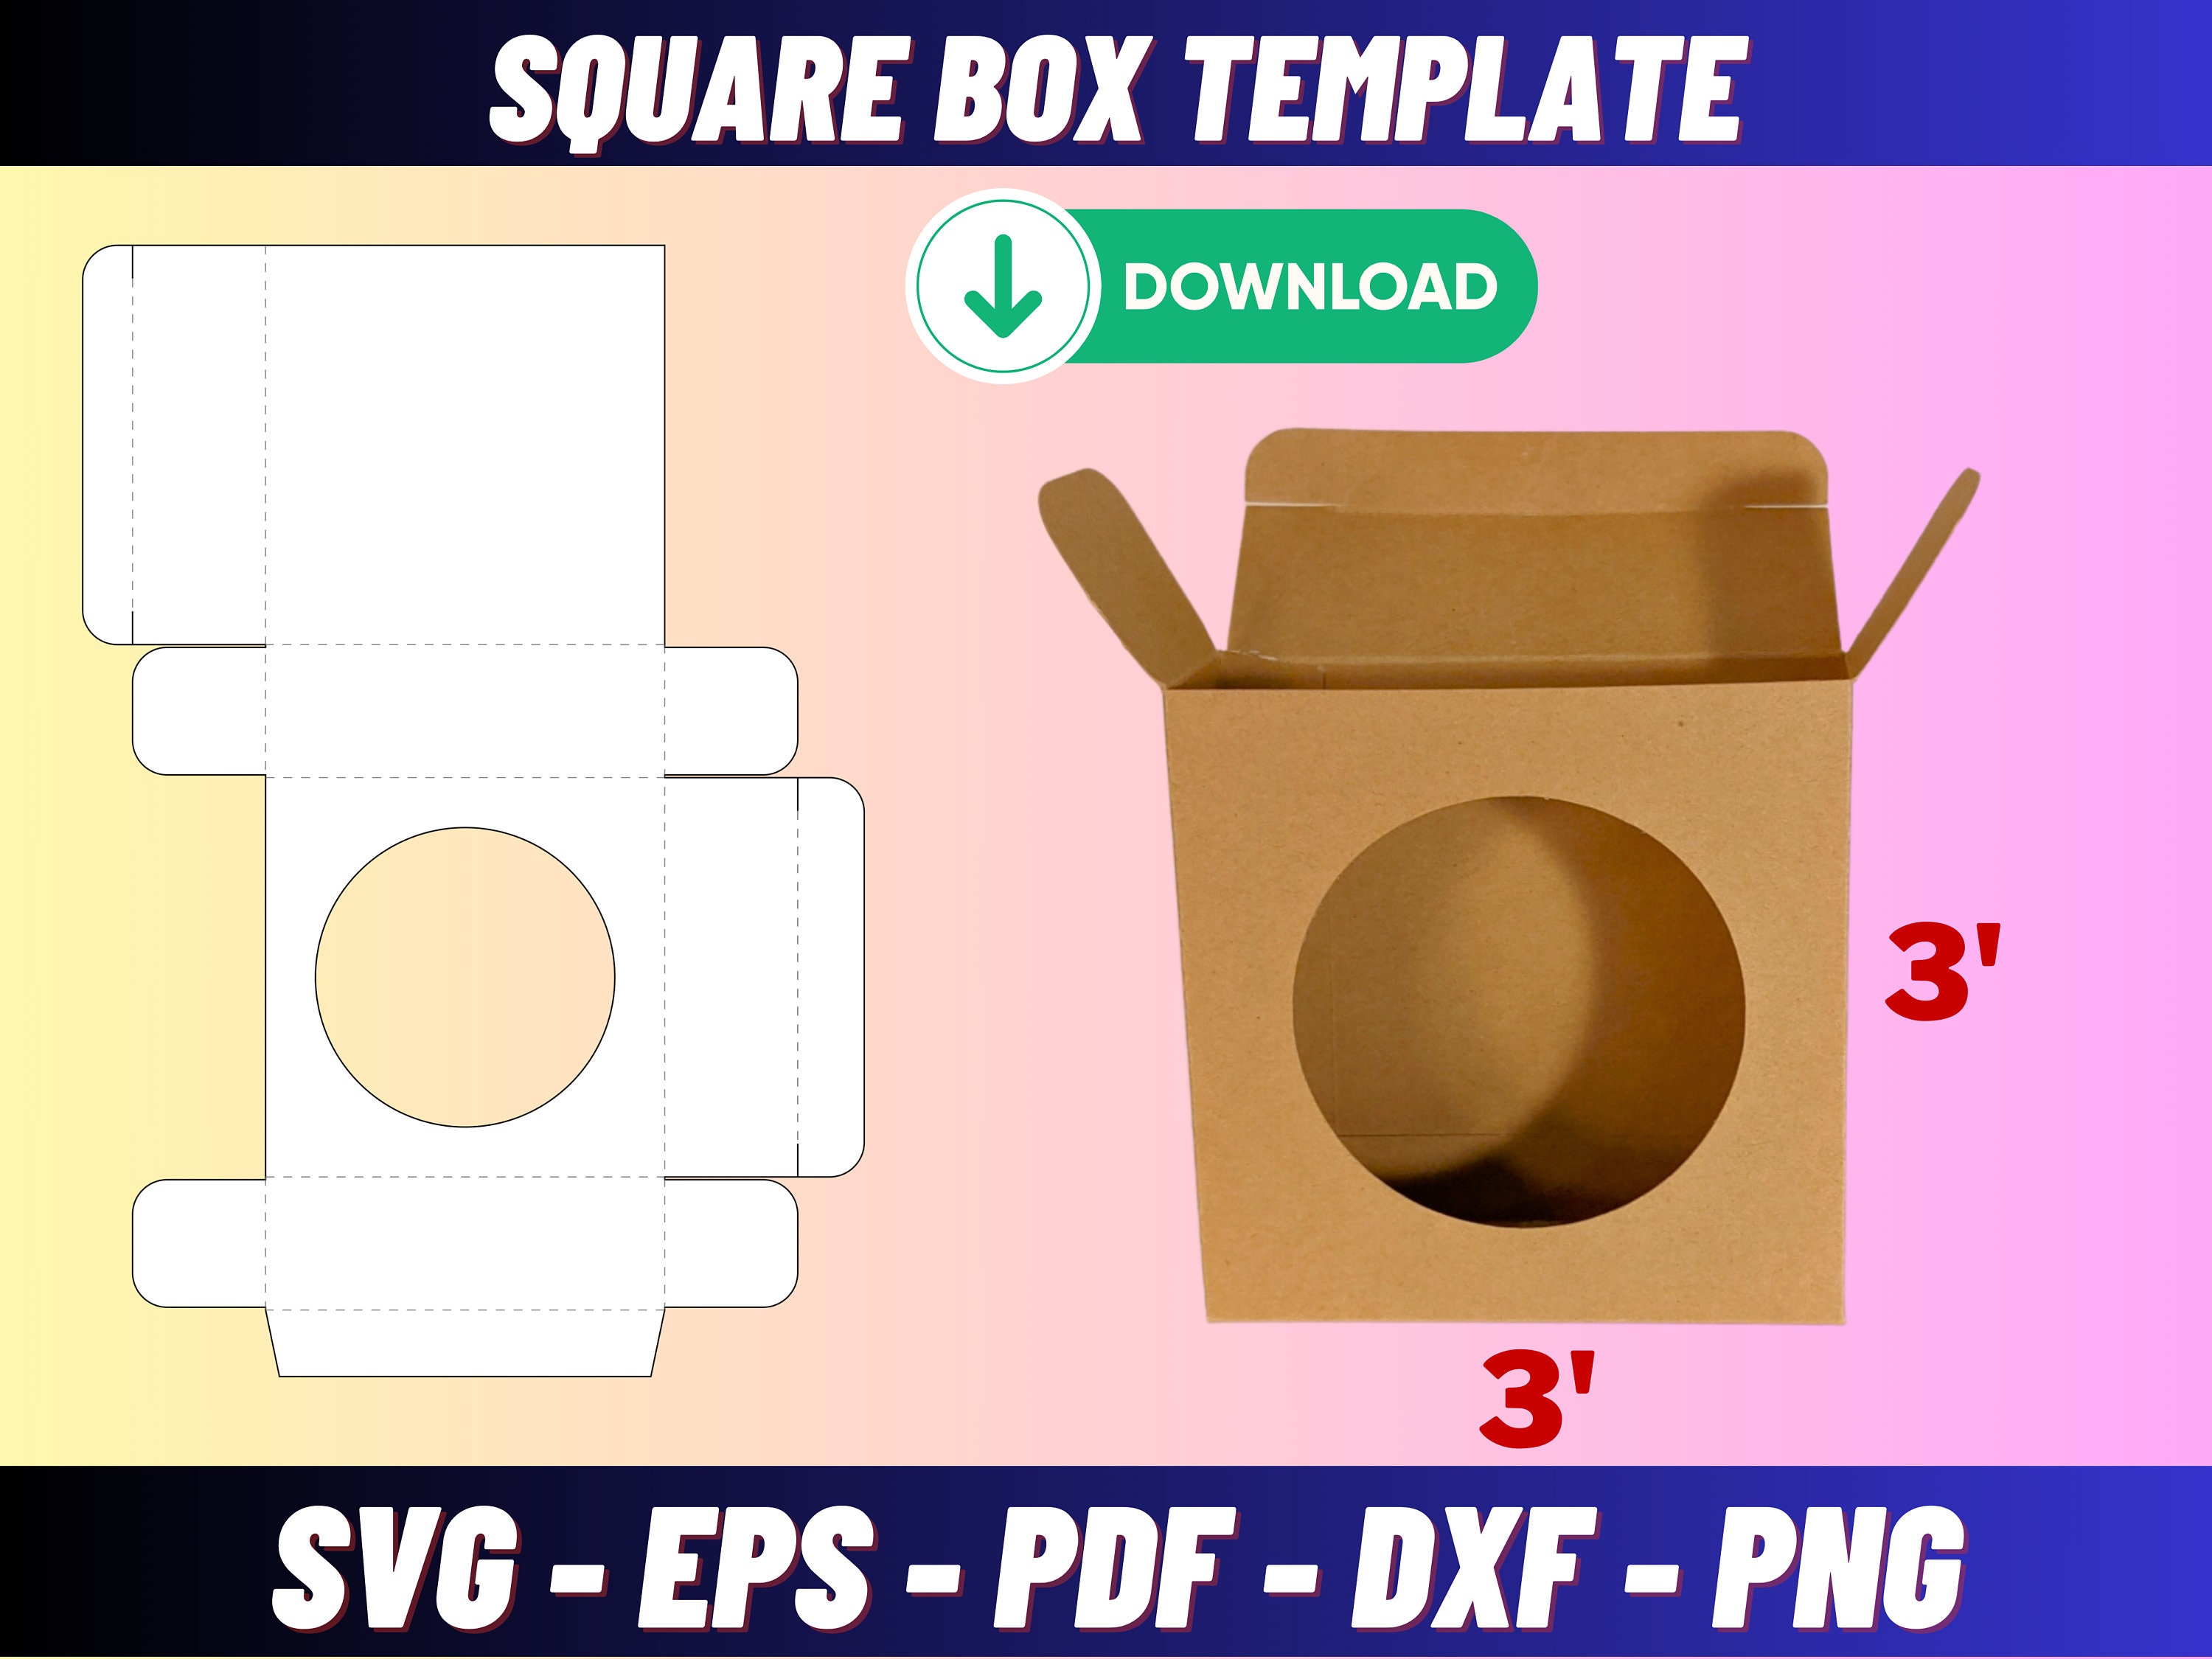 Soap Box Template, Soap Box Packaging, DIY, Custom, Png, Canva, Svg,  Cricut, Printable, BLANK Template, Instant Download 